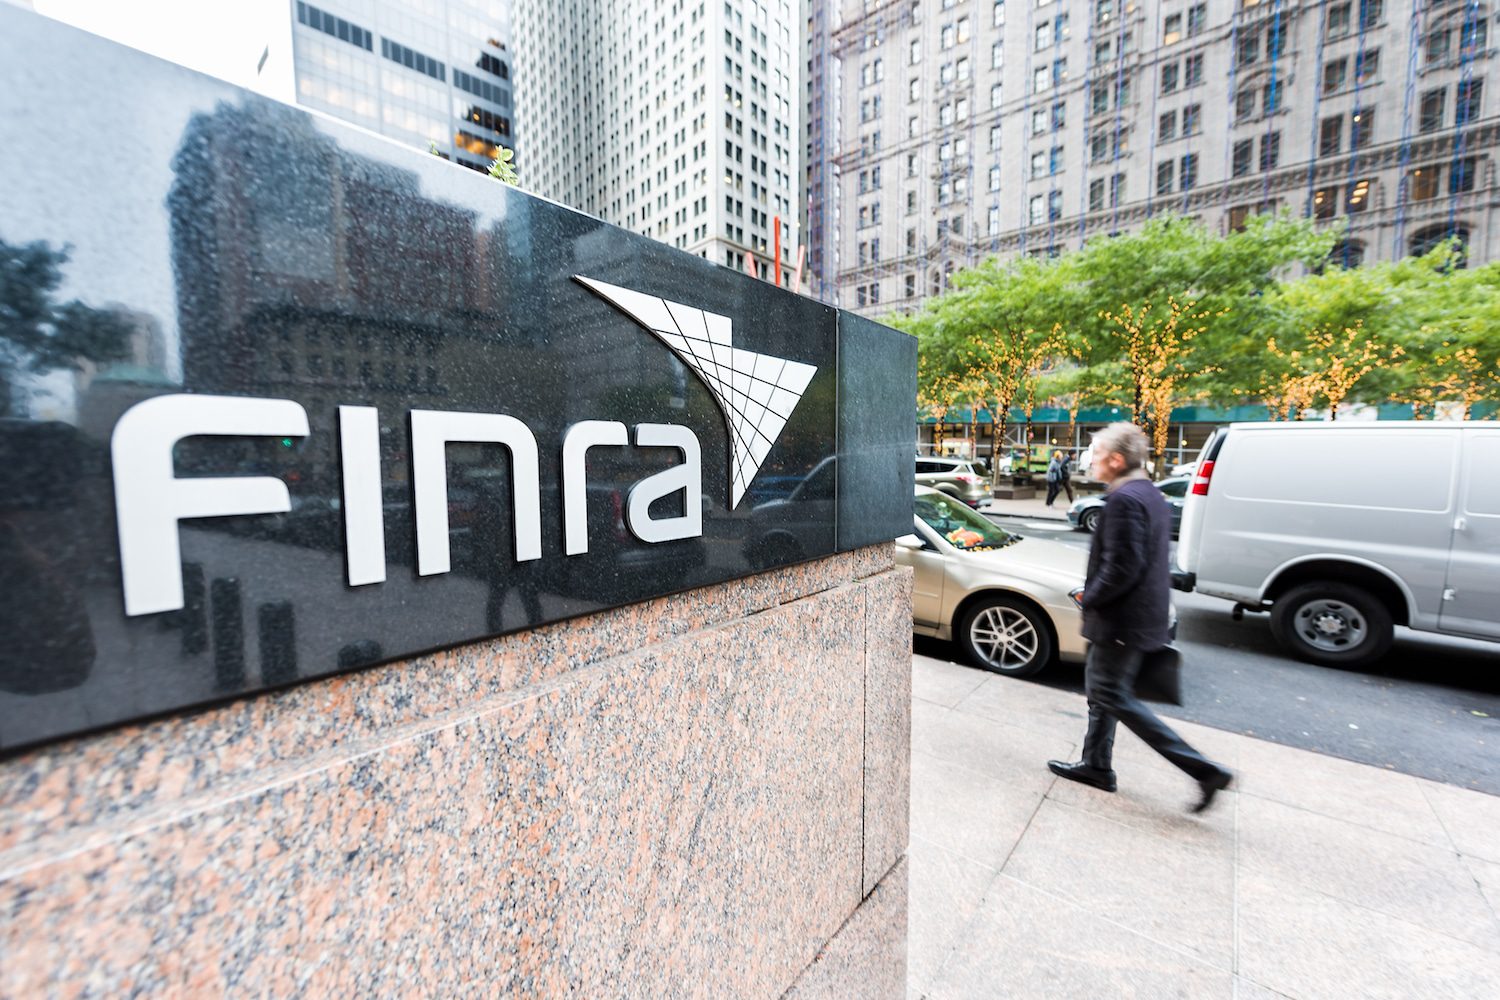 Finra's new headquarters in new york city.